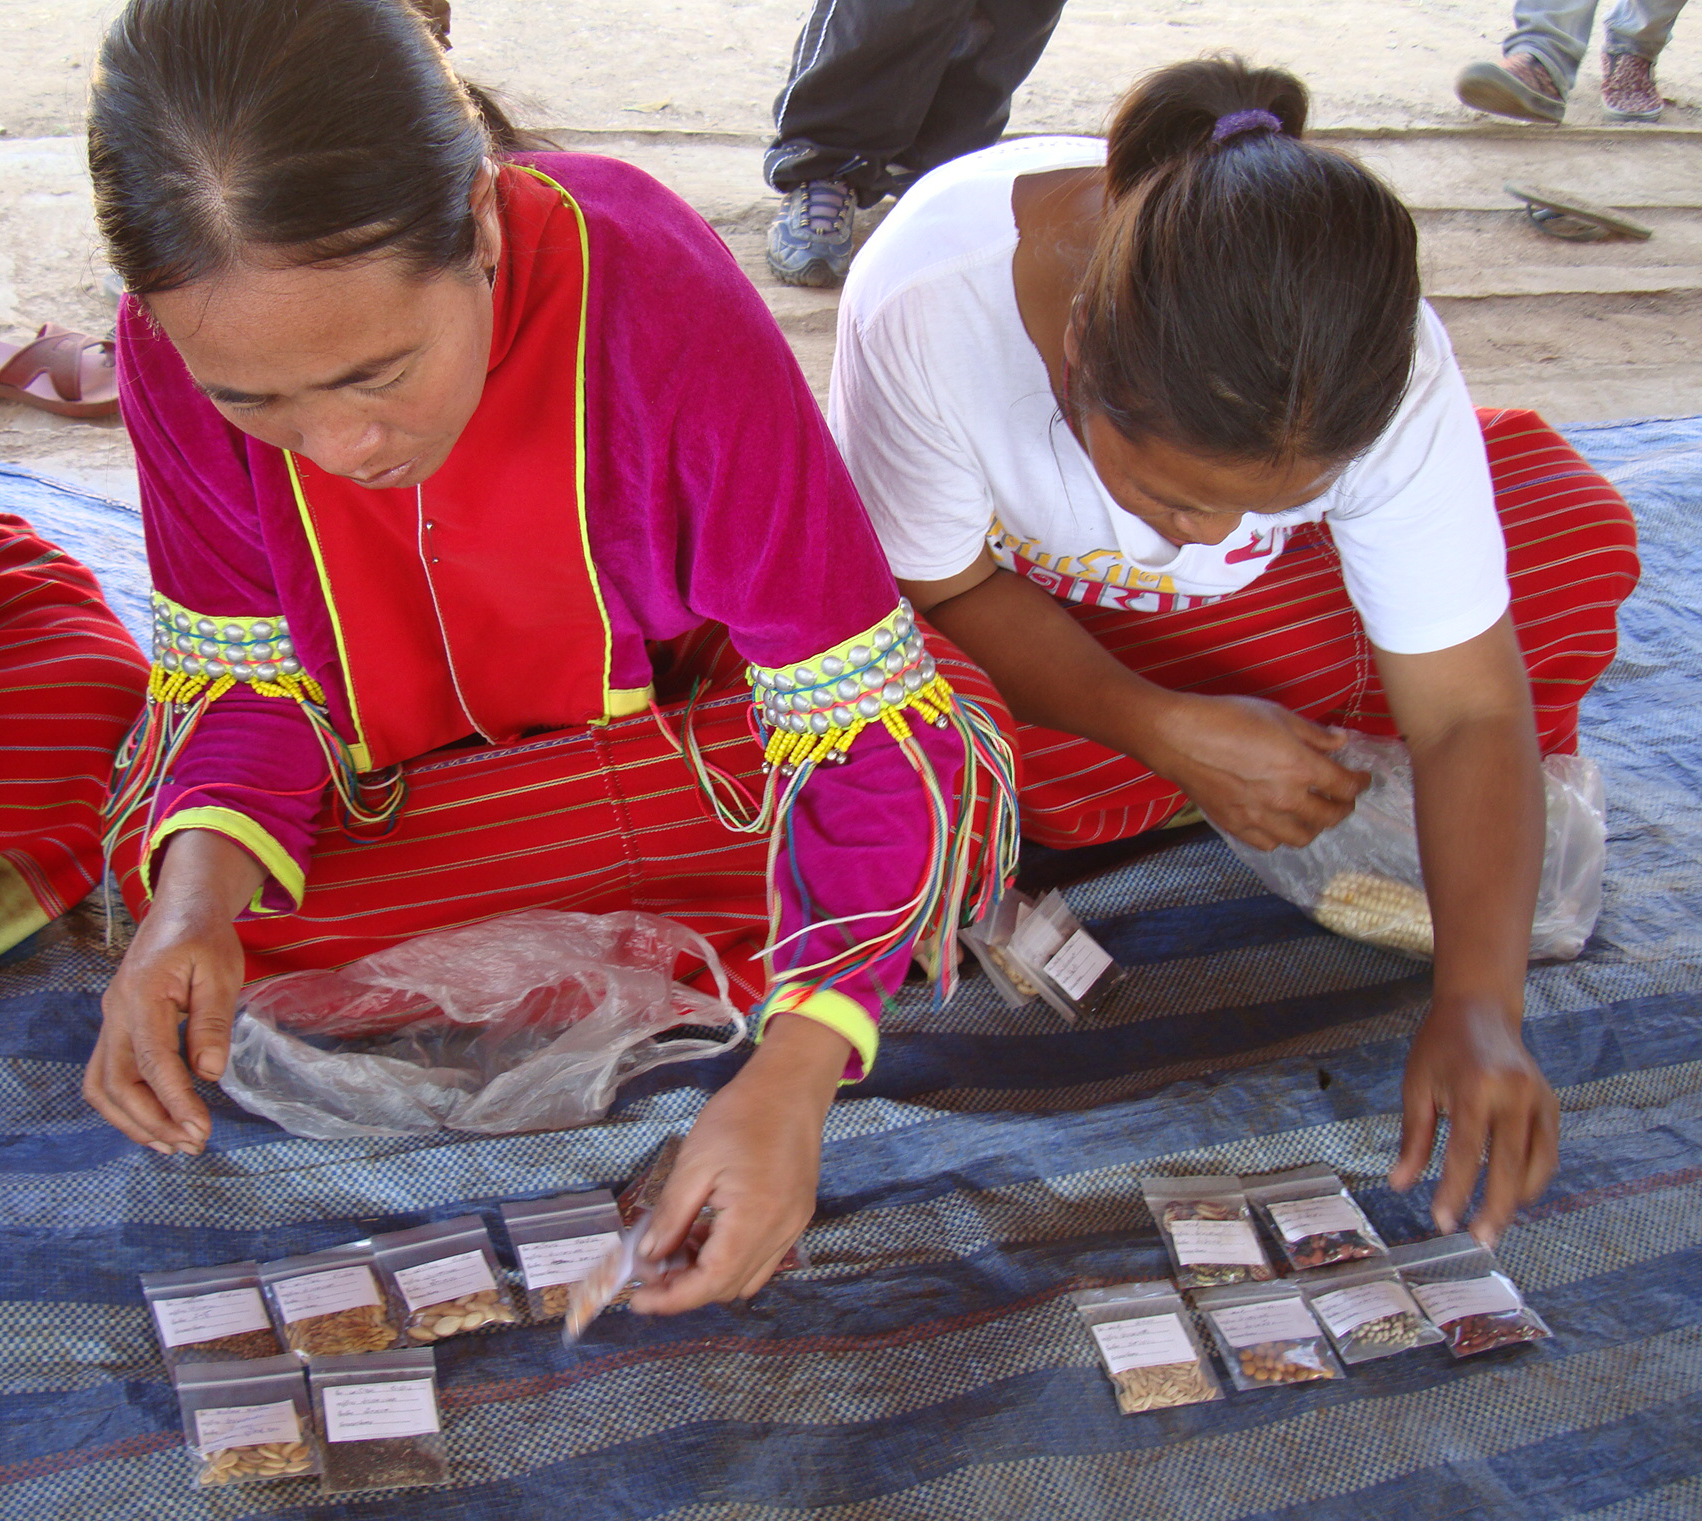 Women seated on a mat sort through labeled packets of seeds